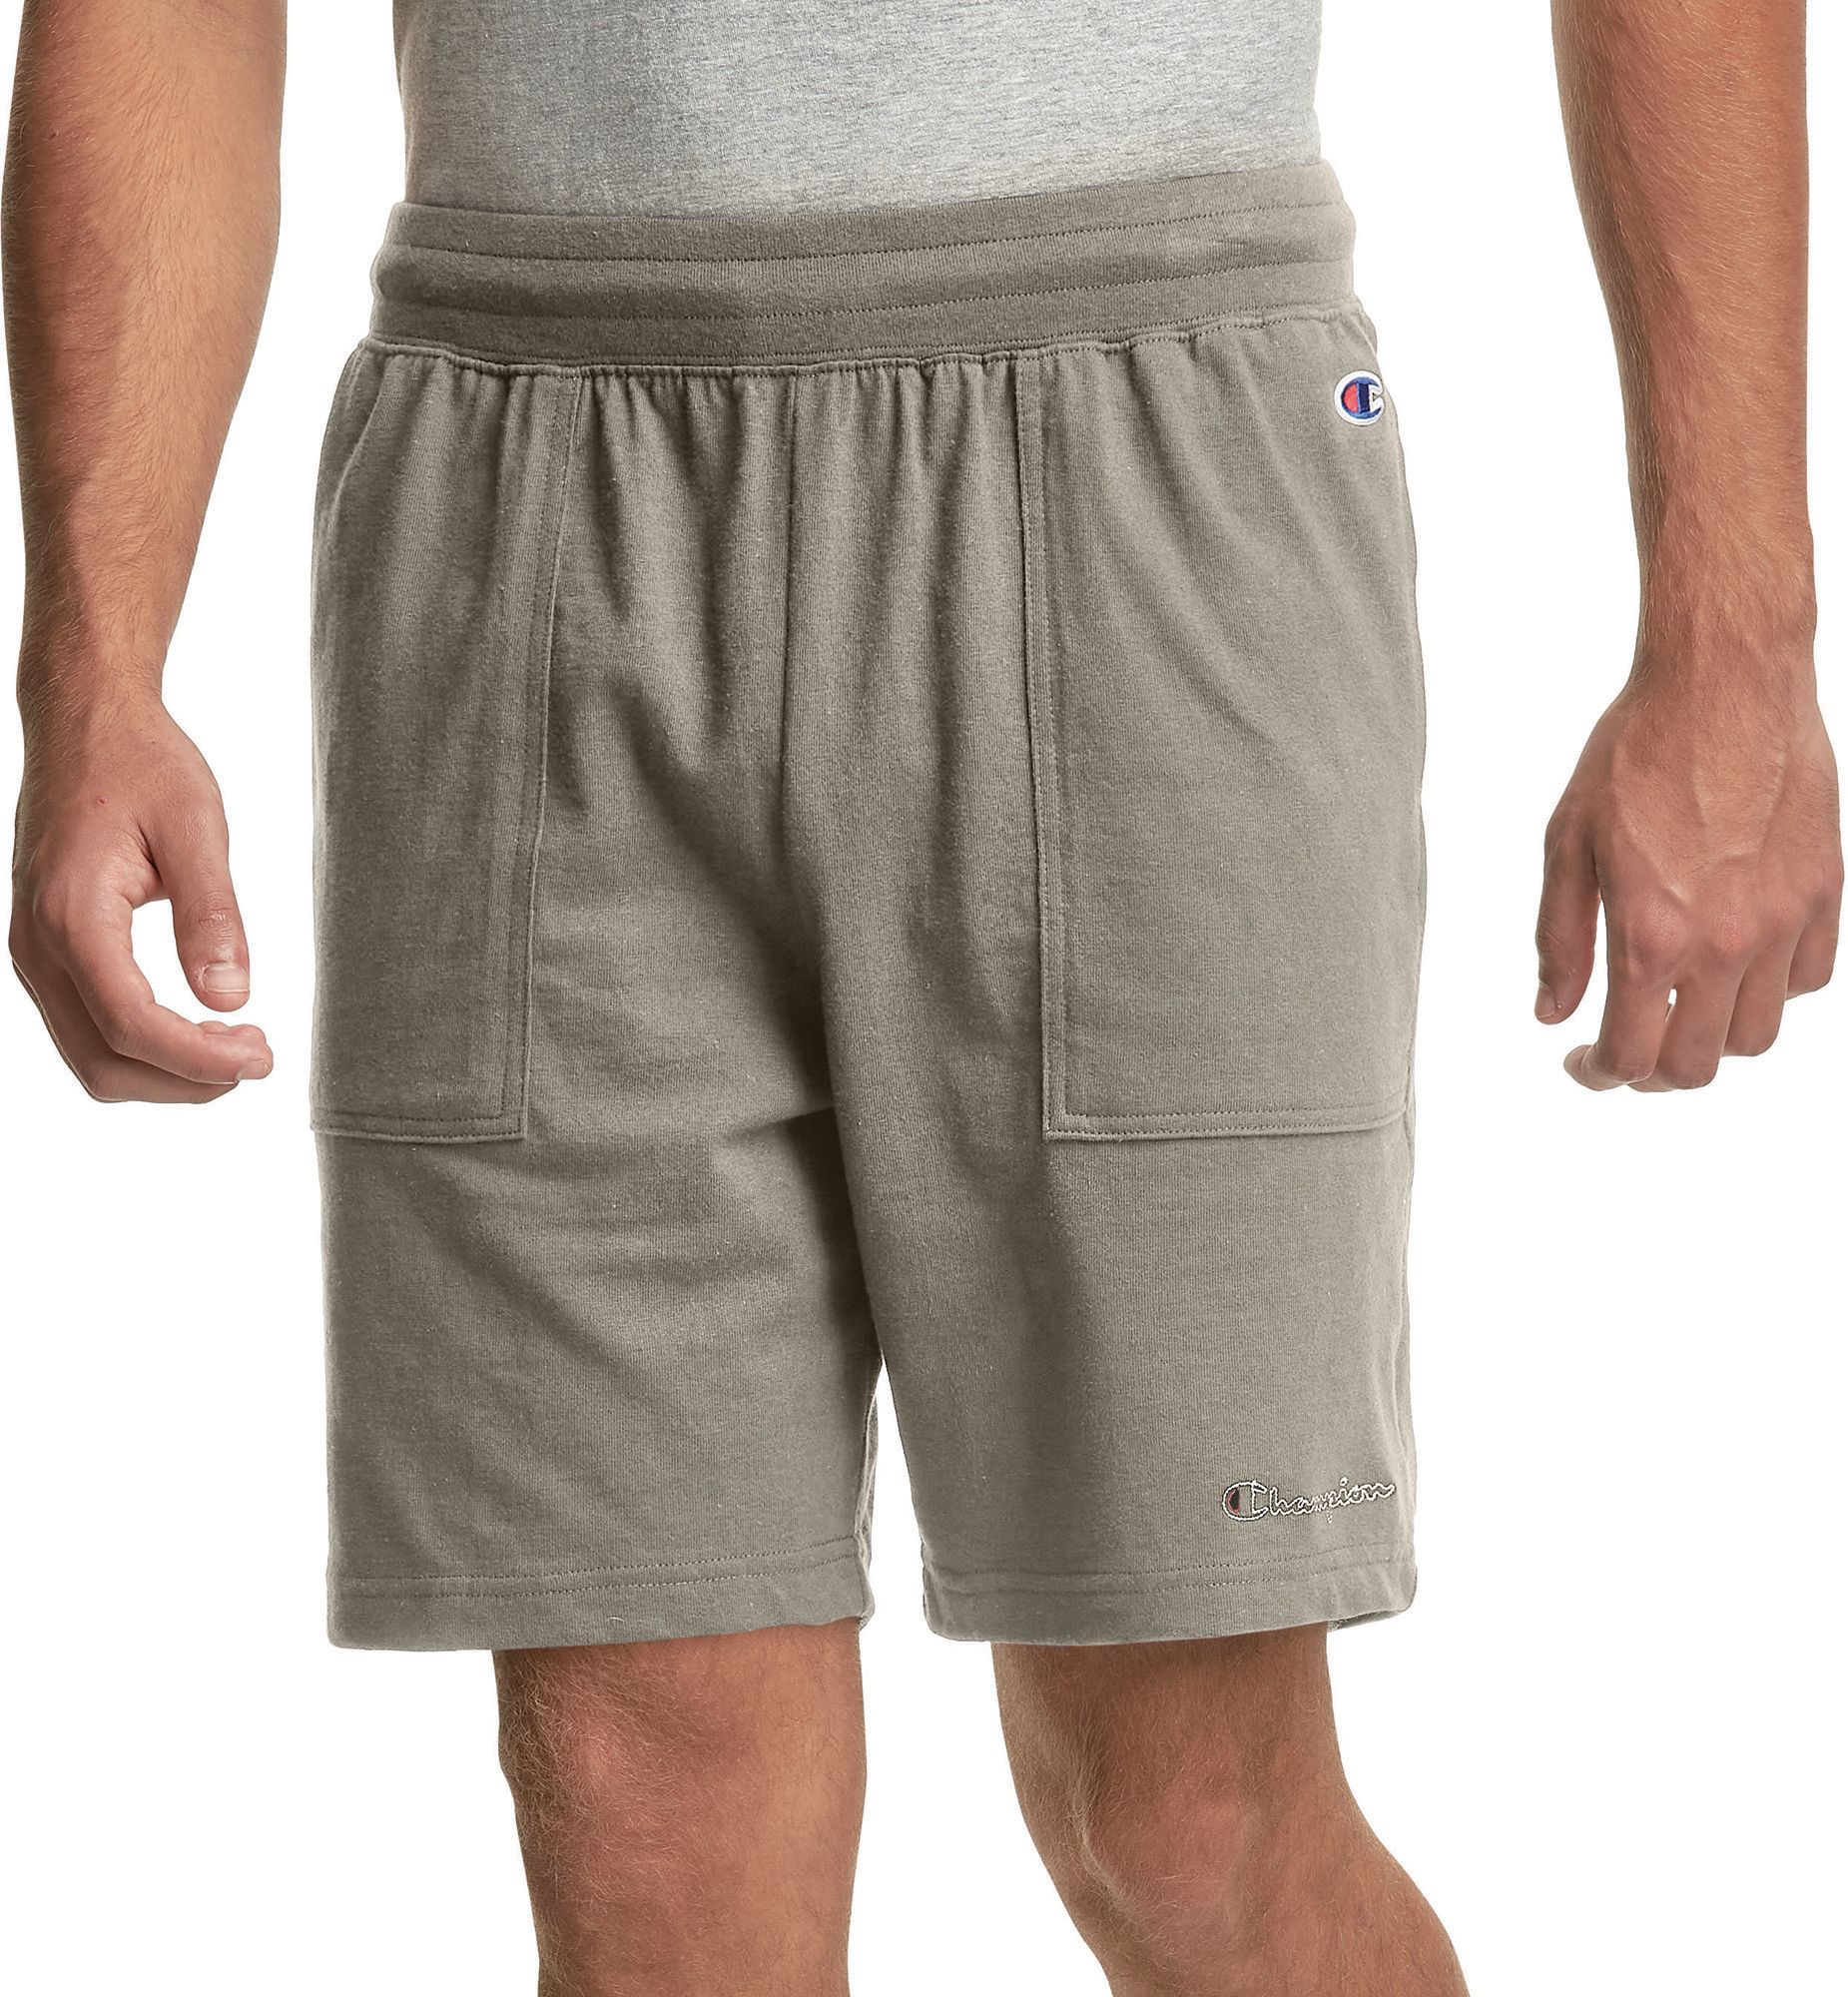 Champion Men's Middleweight Shorts